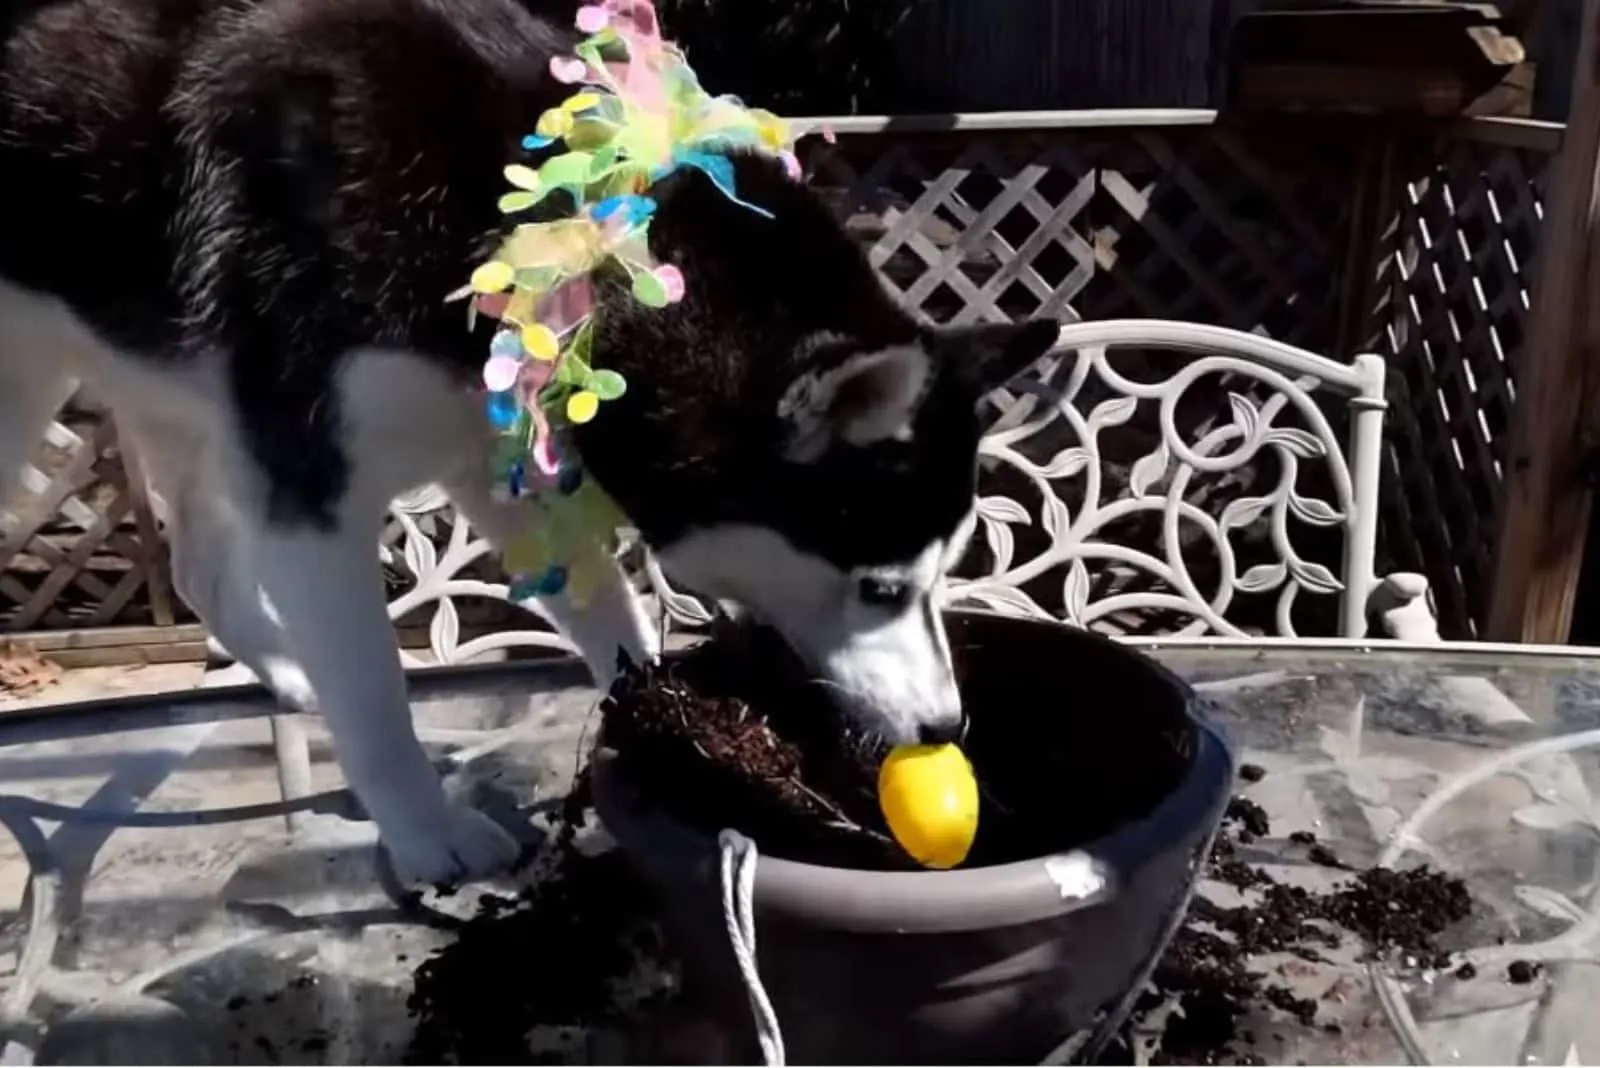 the husky found the easter egg in the skasia